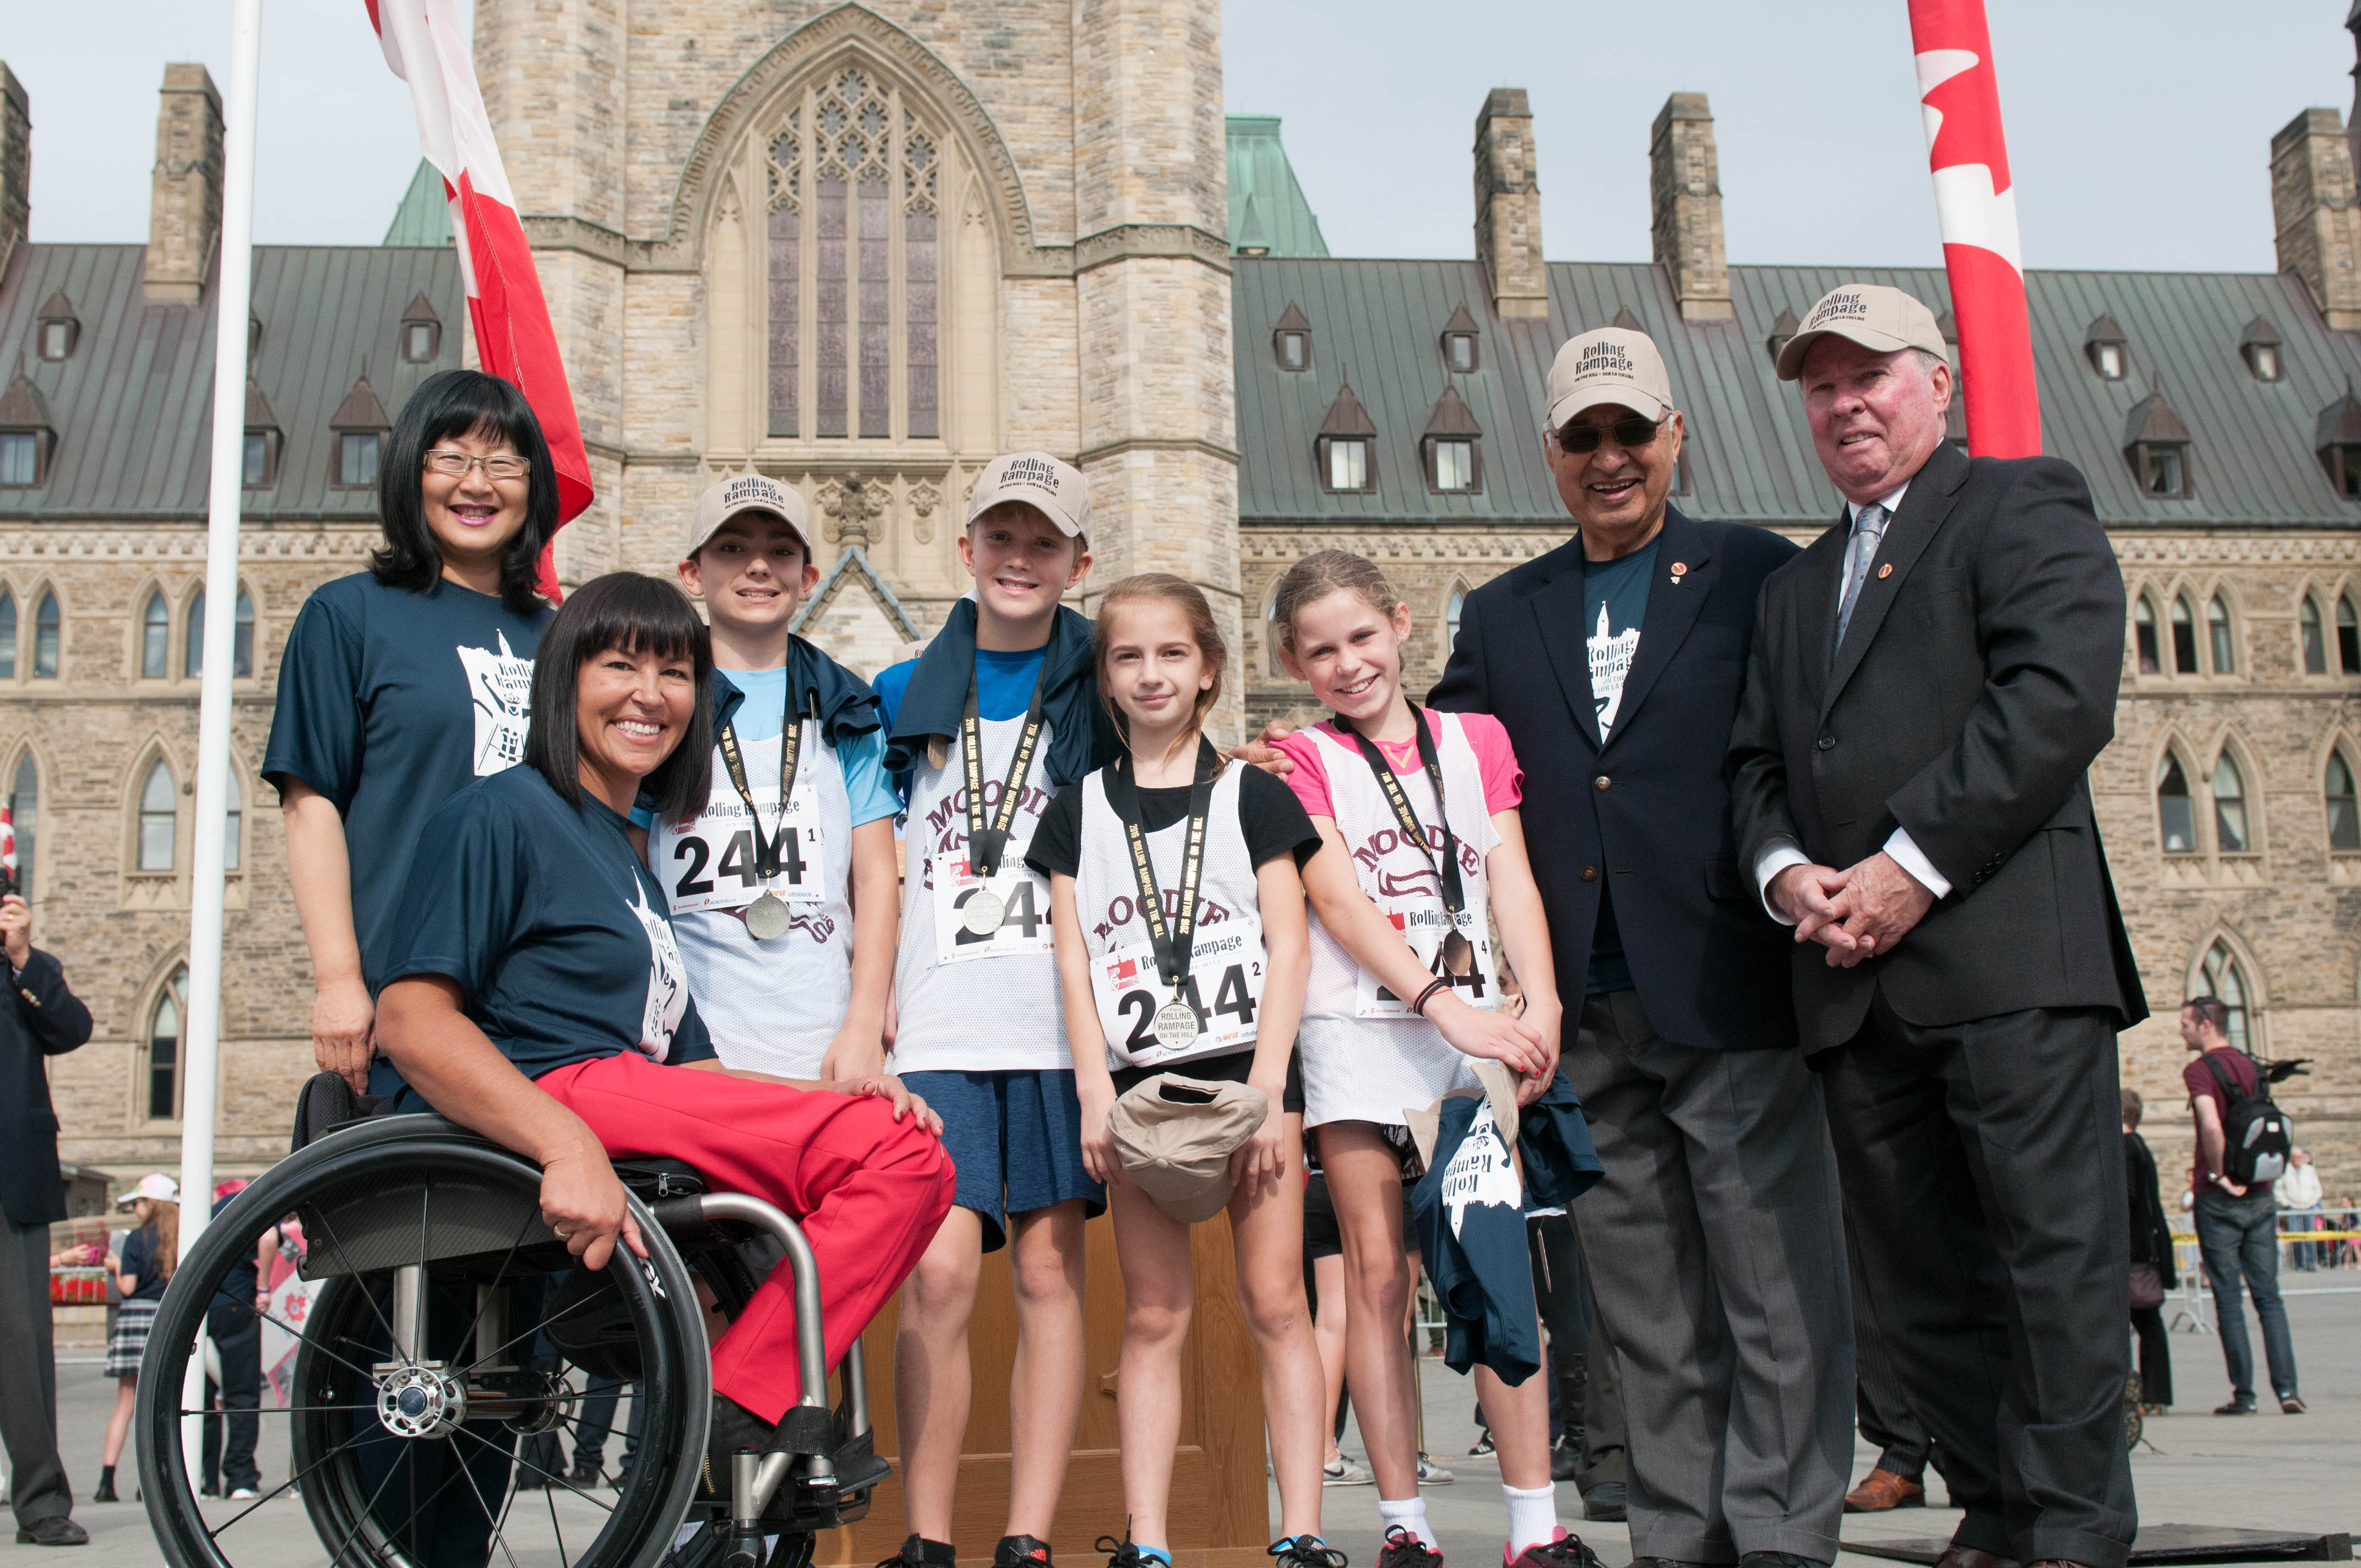 Pictured: Youth winners posed with senators on Parliament Hill.